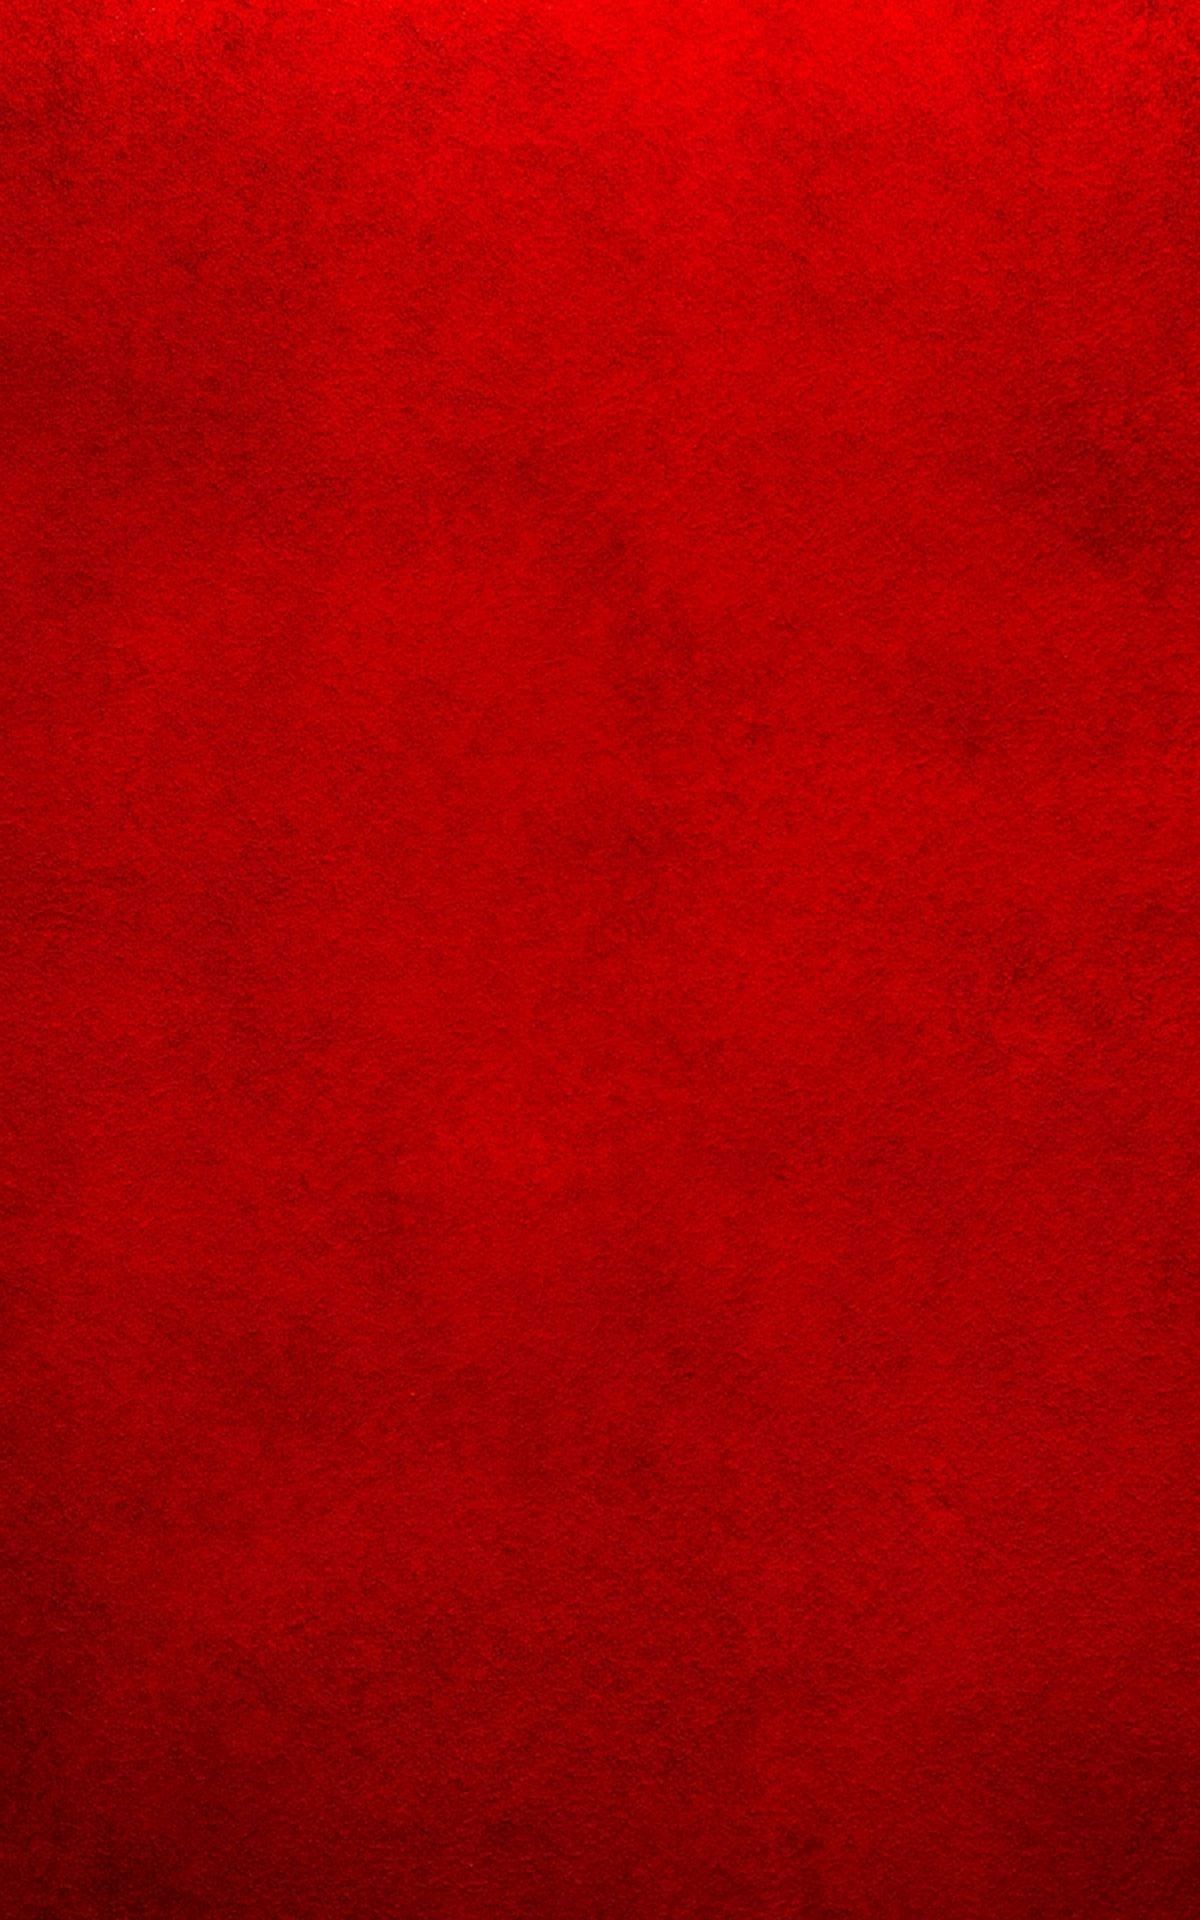 Red iPhone Wallpaper Fresh 3D Black and Red iPhone Wallpaper Of the Day of The Hudson